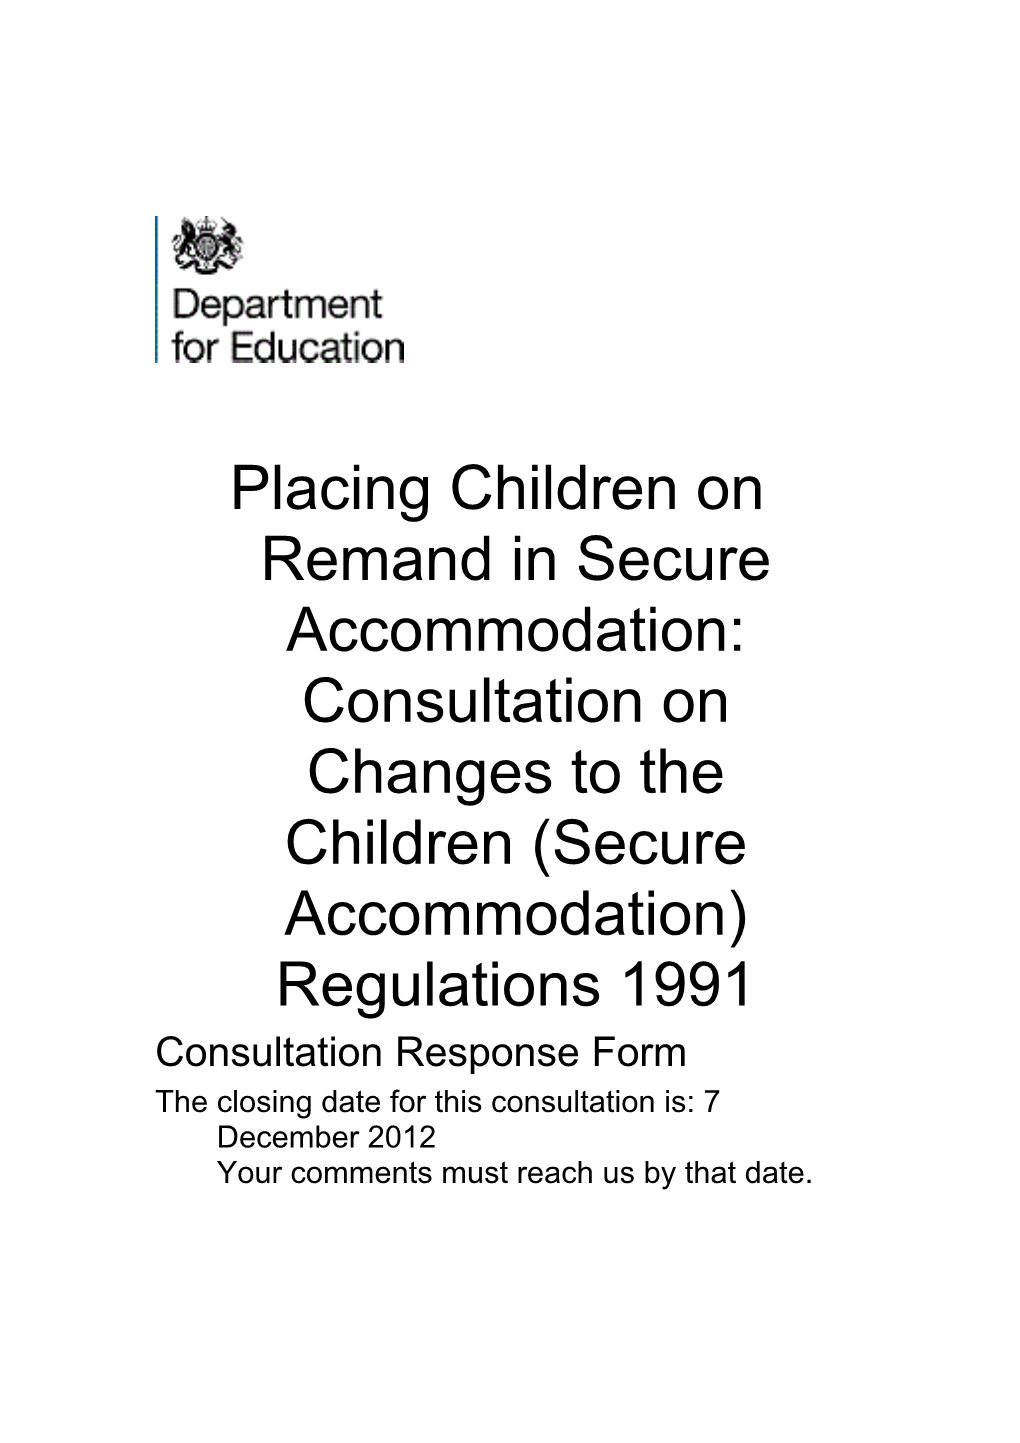 Placing Children on Remand in Secure Accommodation: Consultation on Changes to the Children